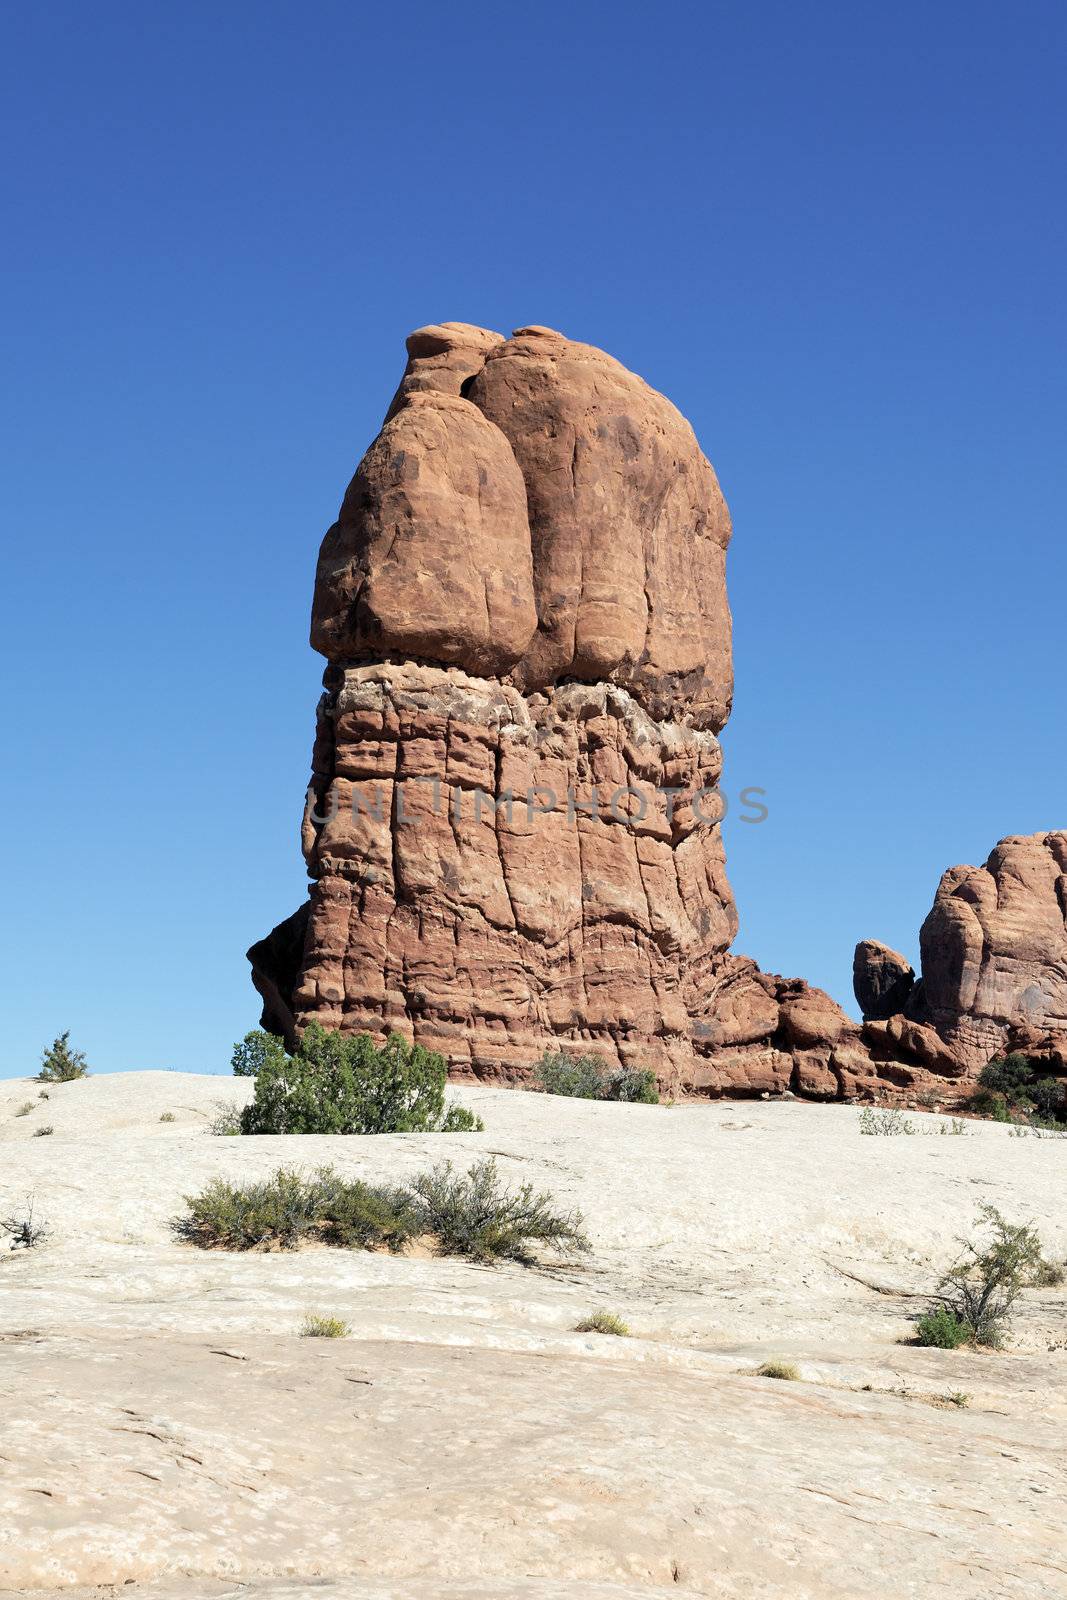 A red Rock formation, located in Arches National Park in Moab, Utah 